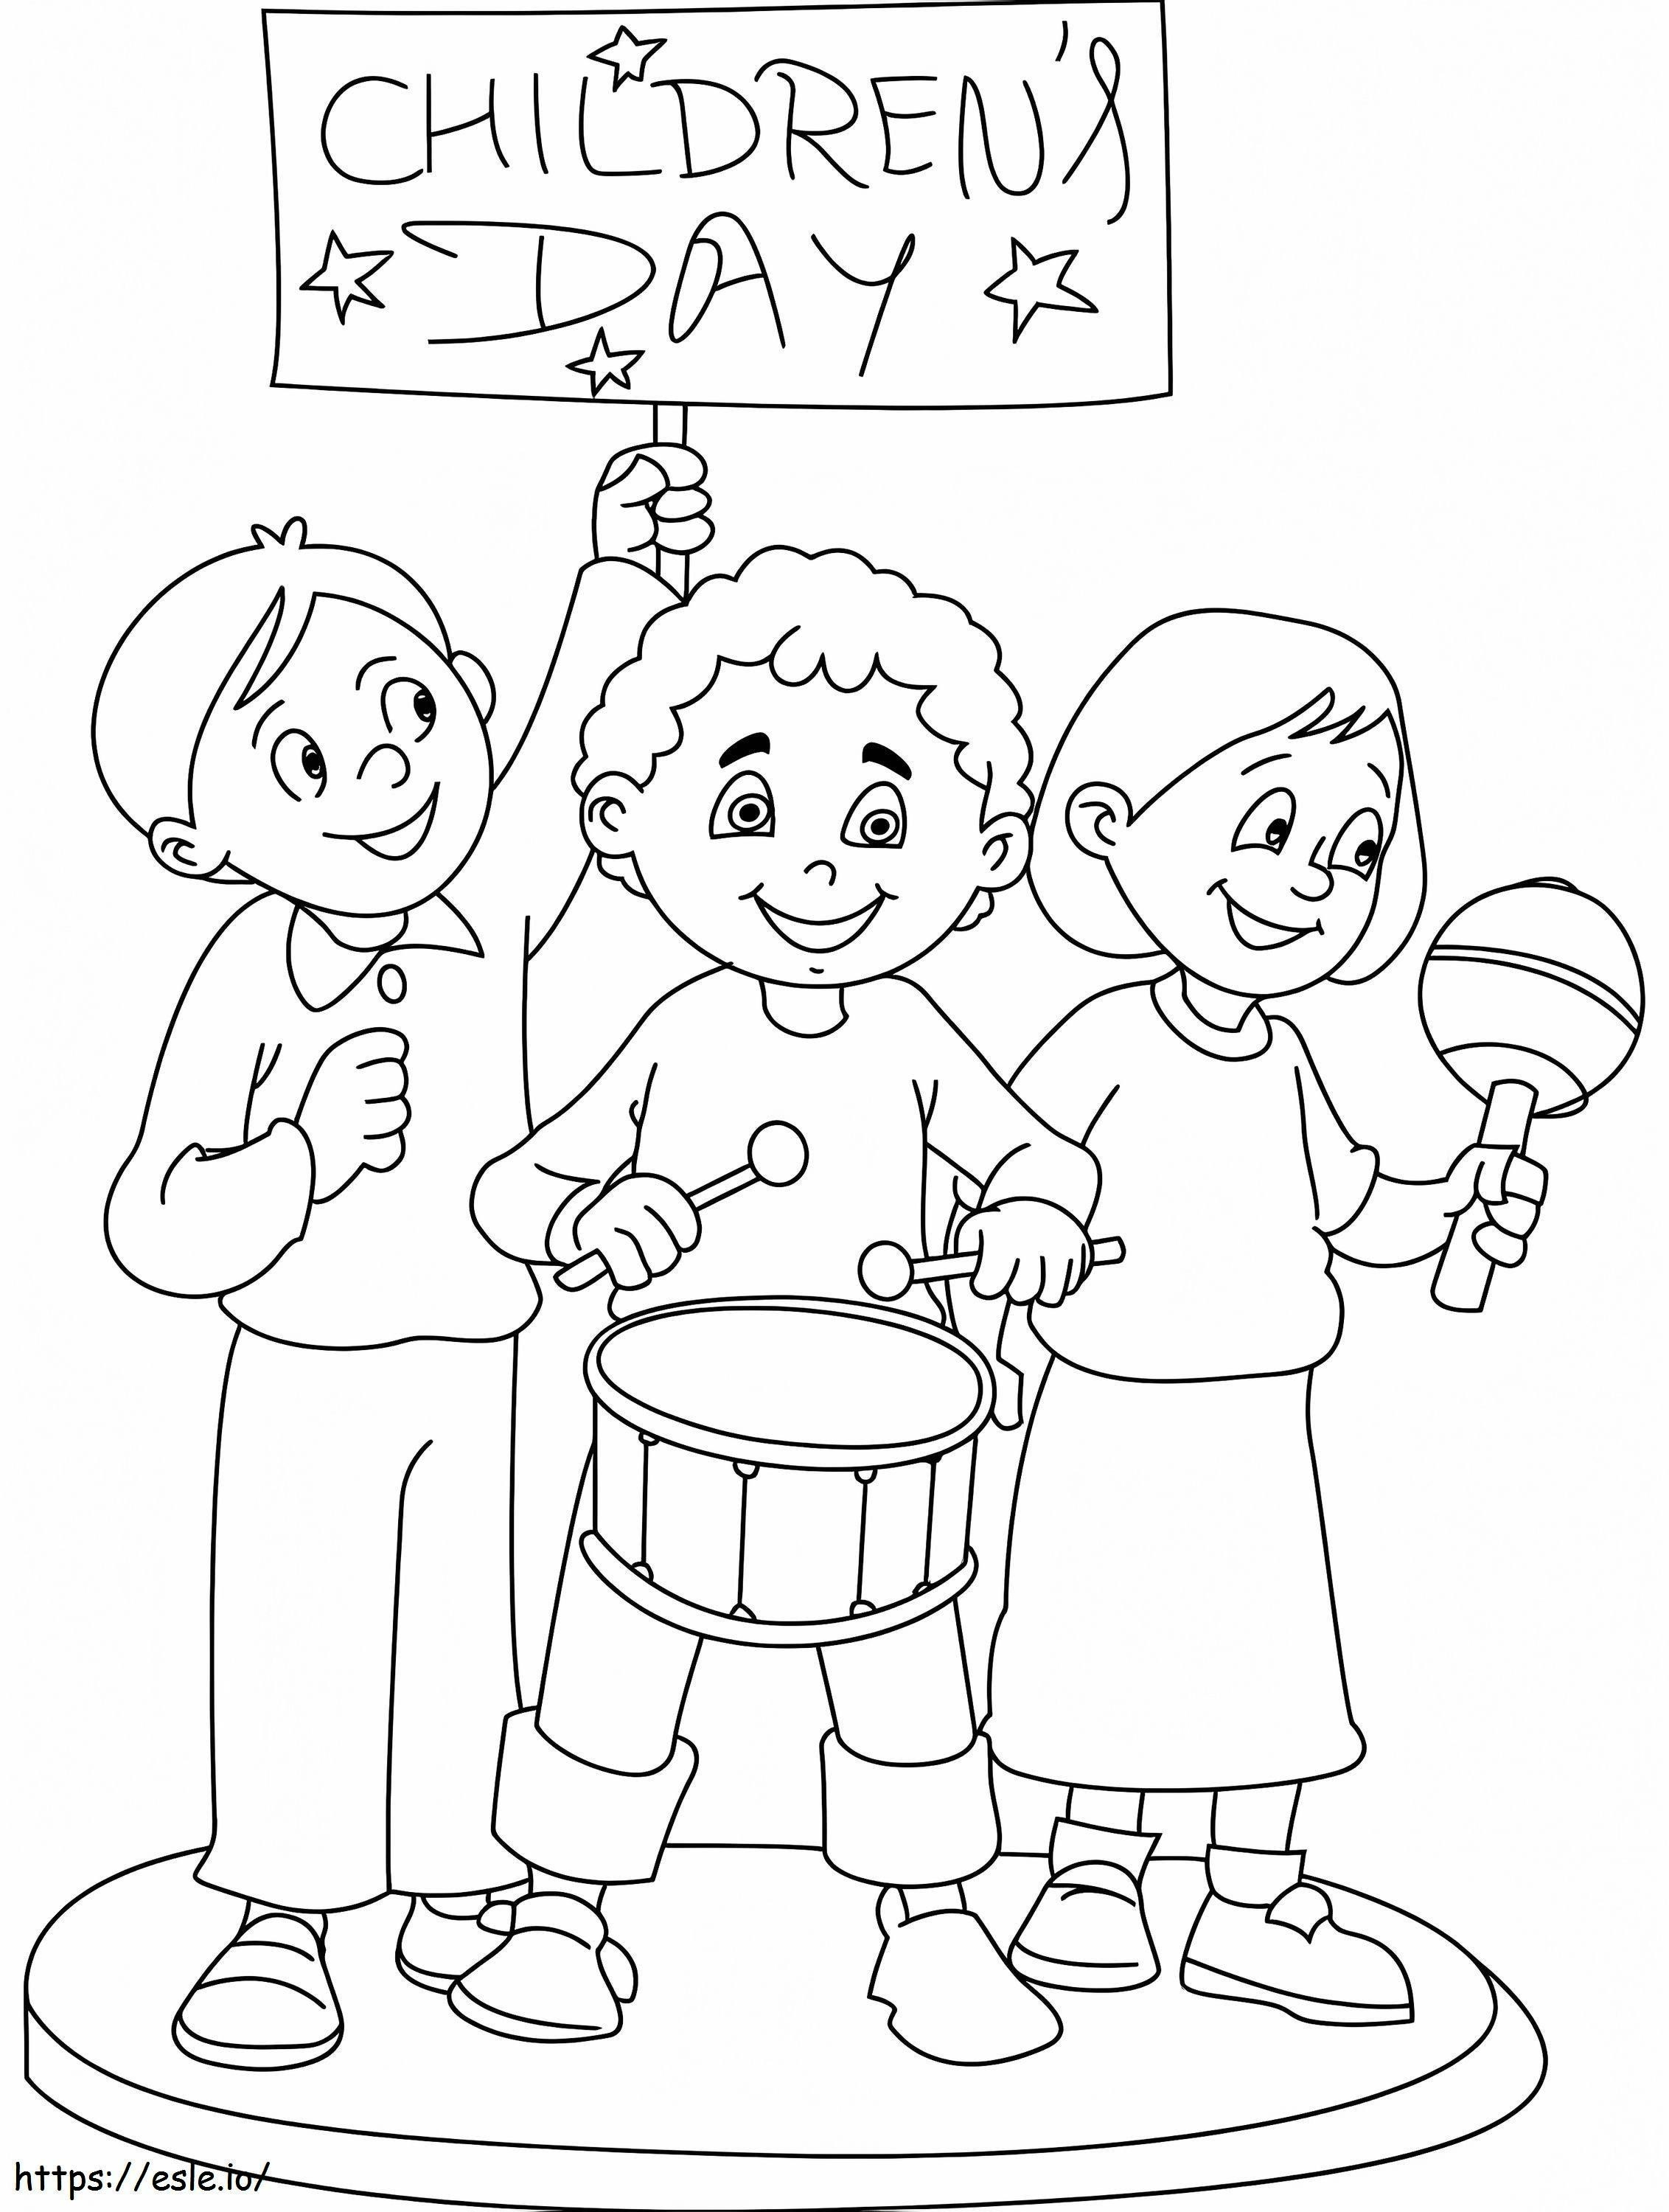 Childrens Day 1 coloring page